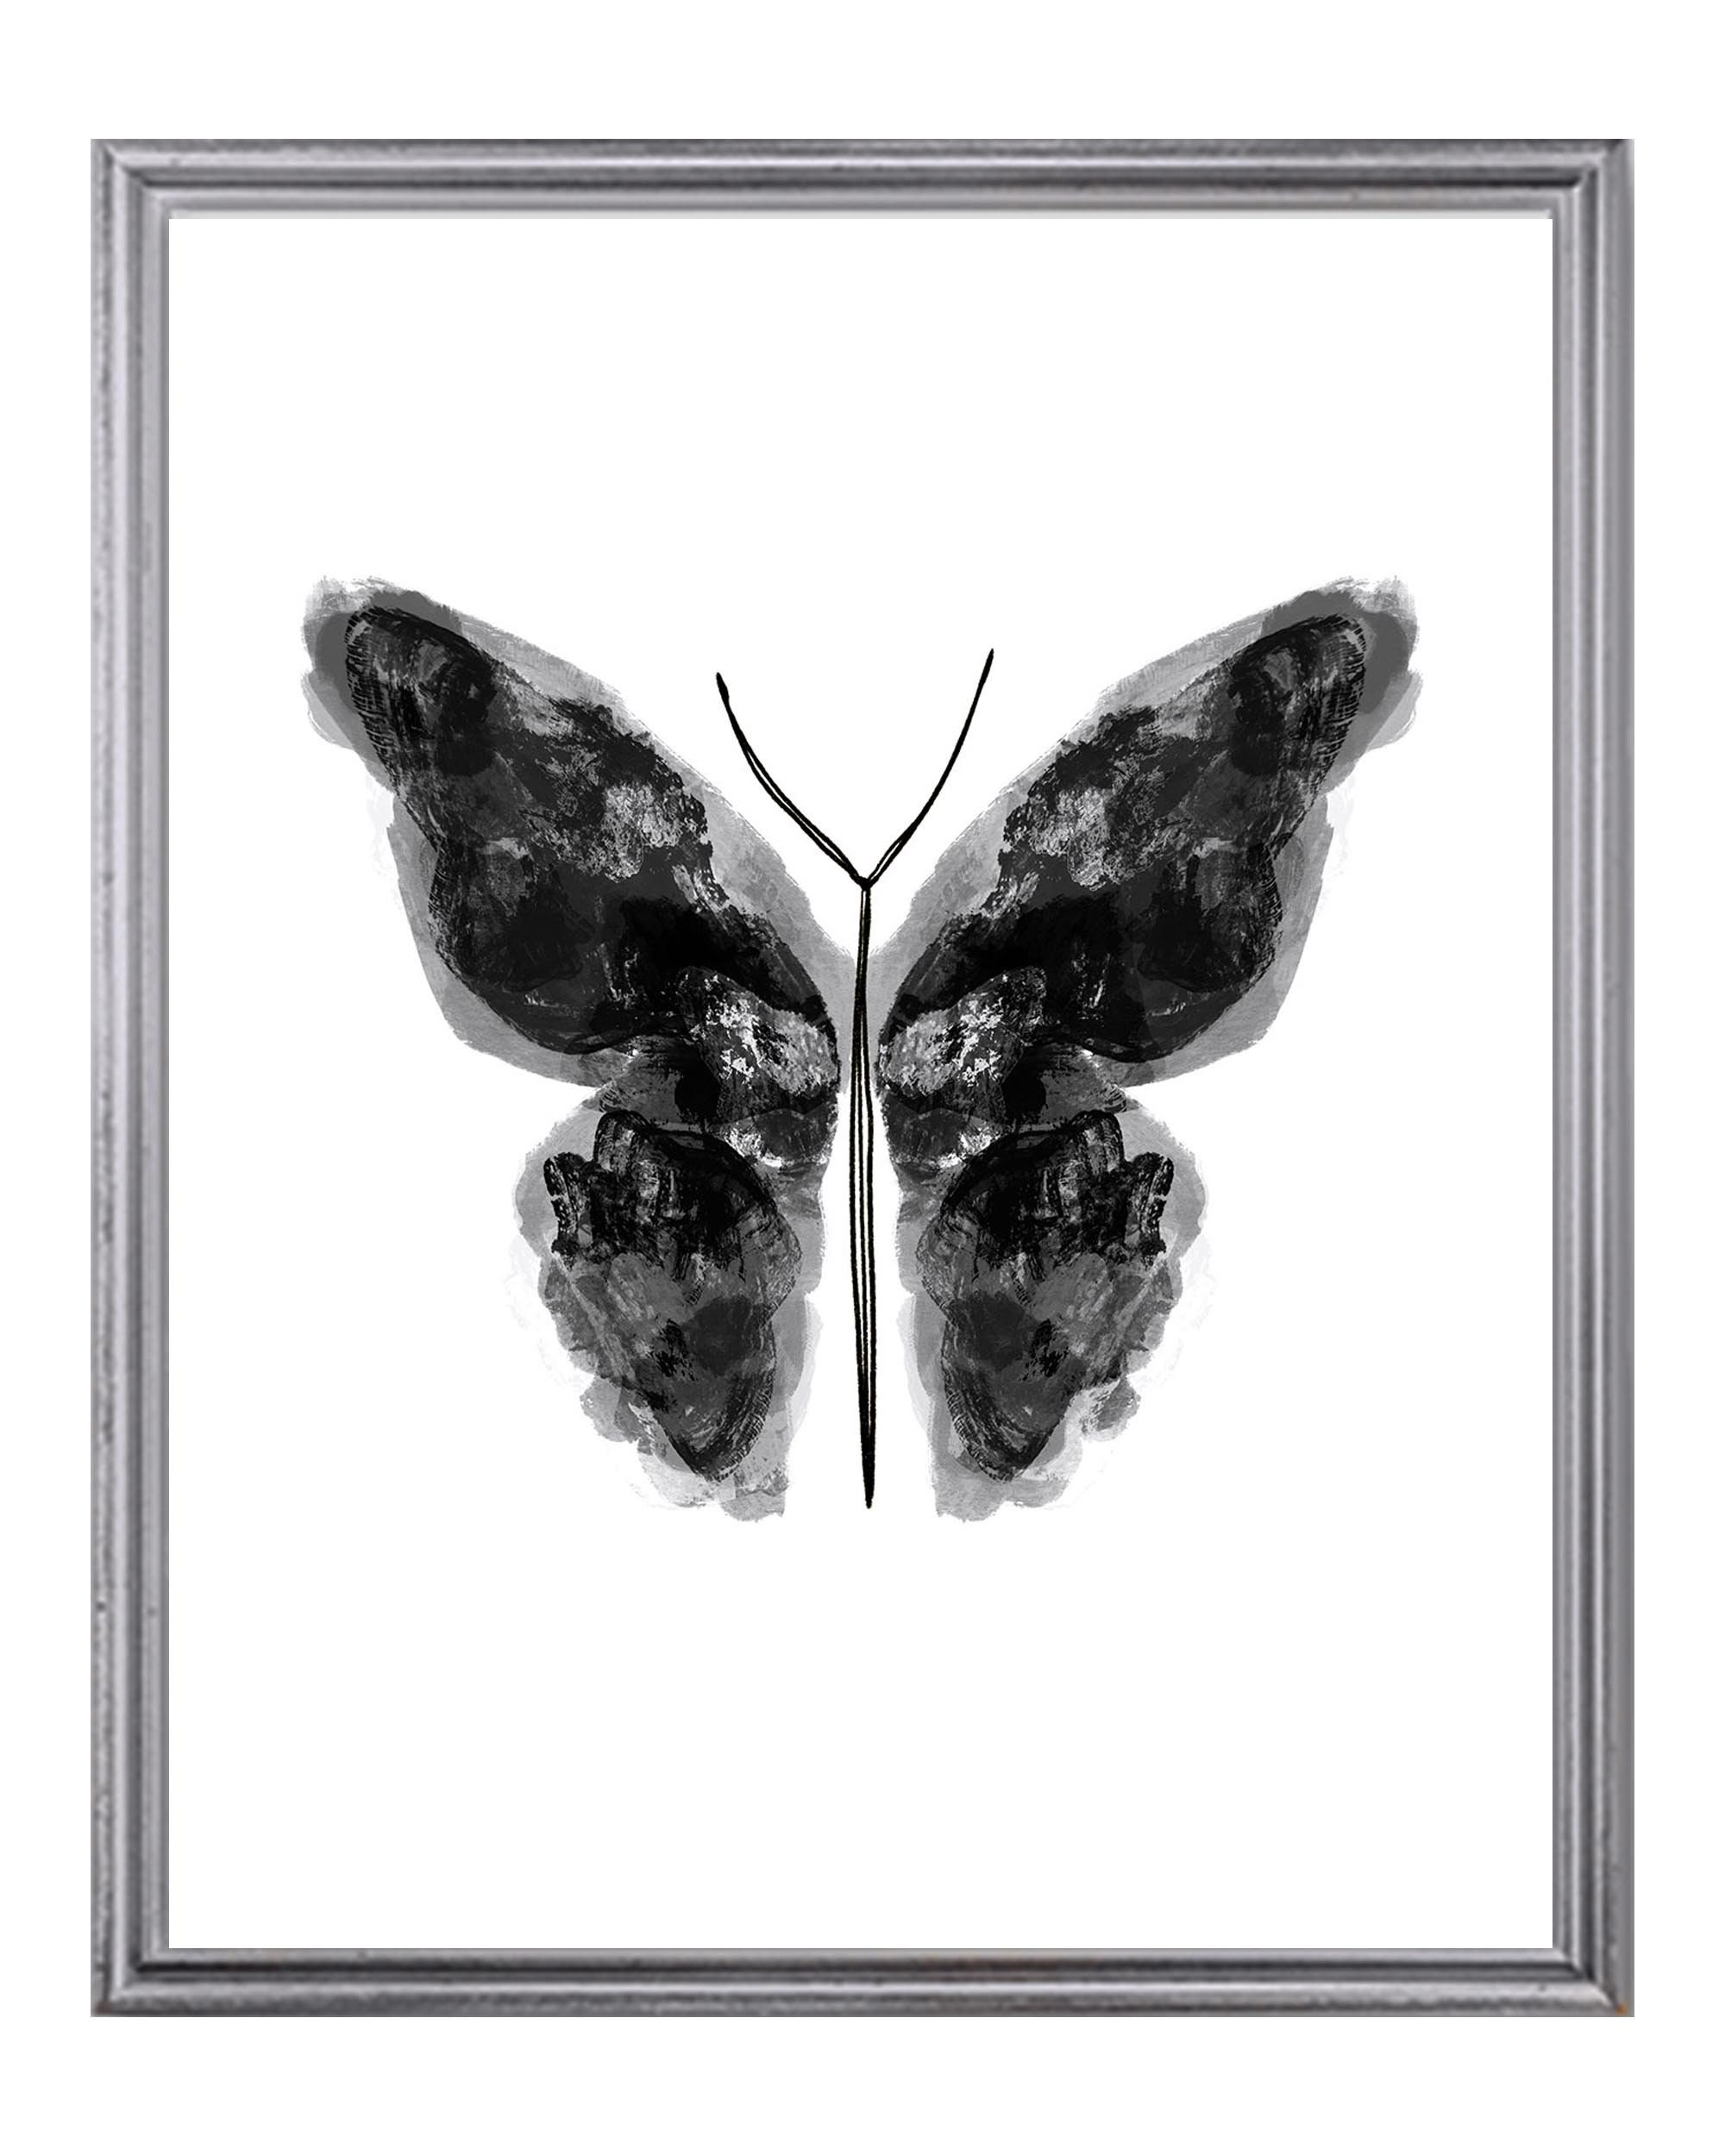 Black Gold Butterfly Canvas Poster Wall Home Decor Art Print Watercolor Picture 